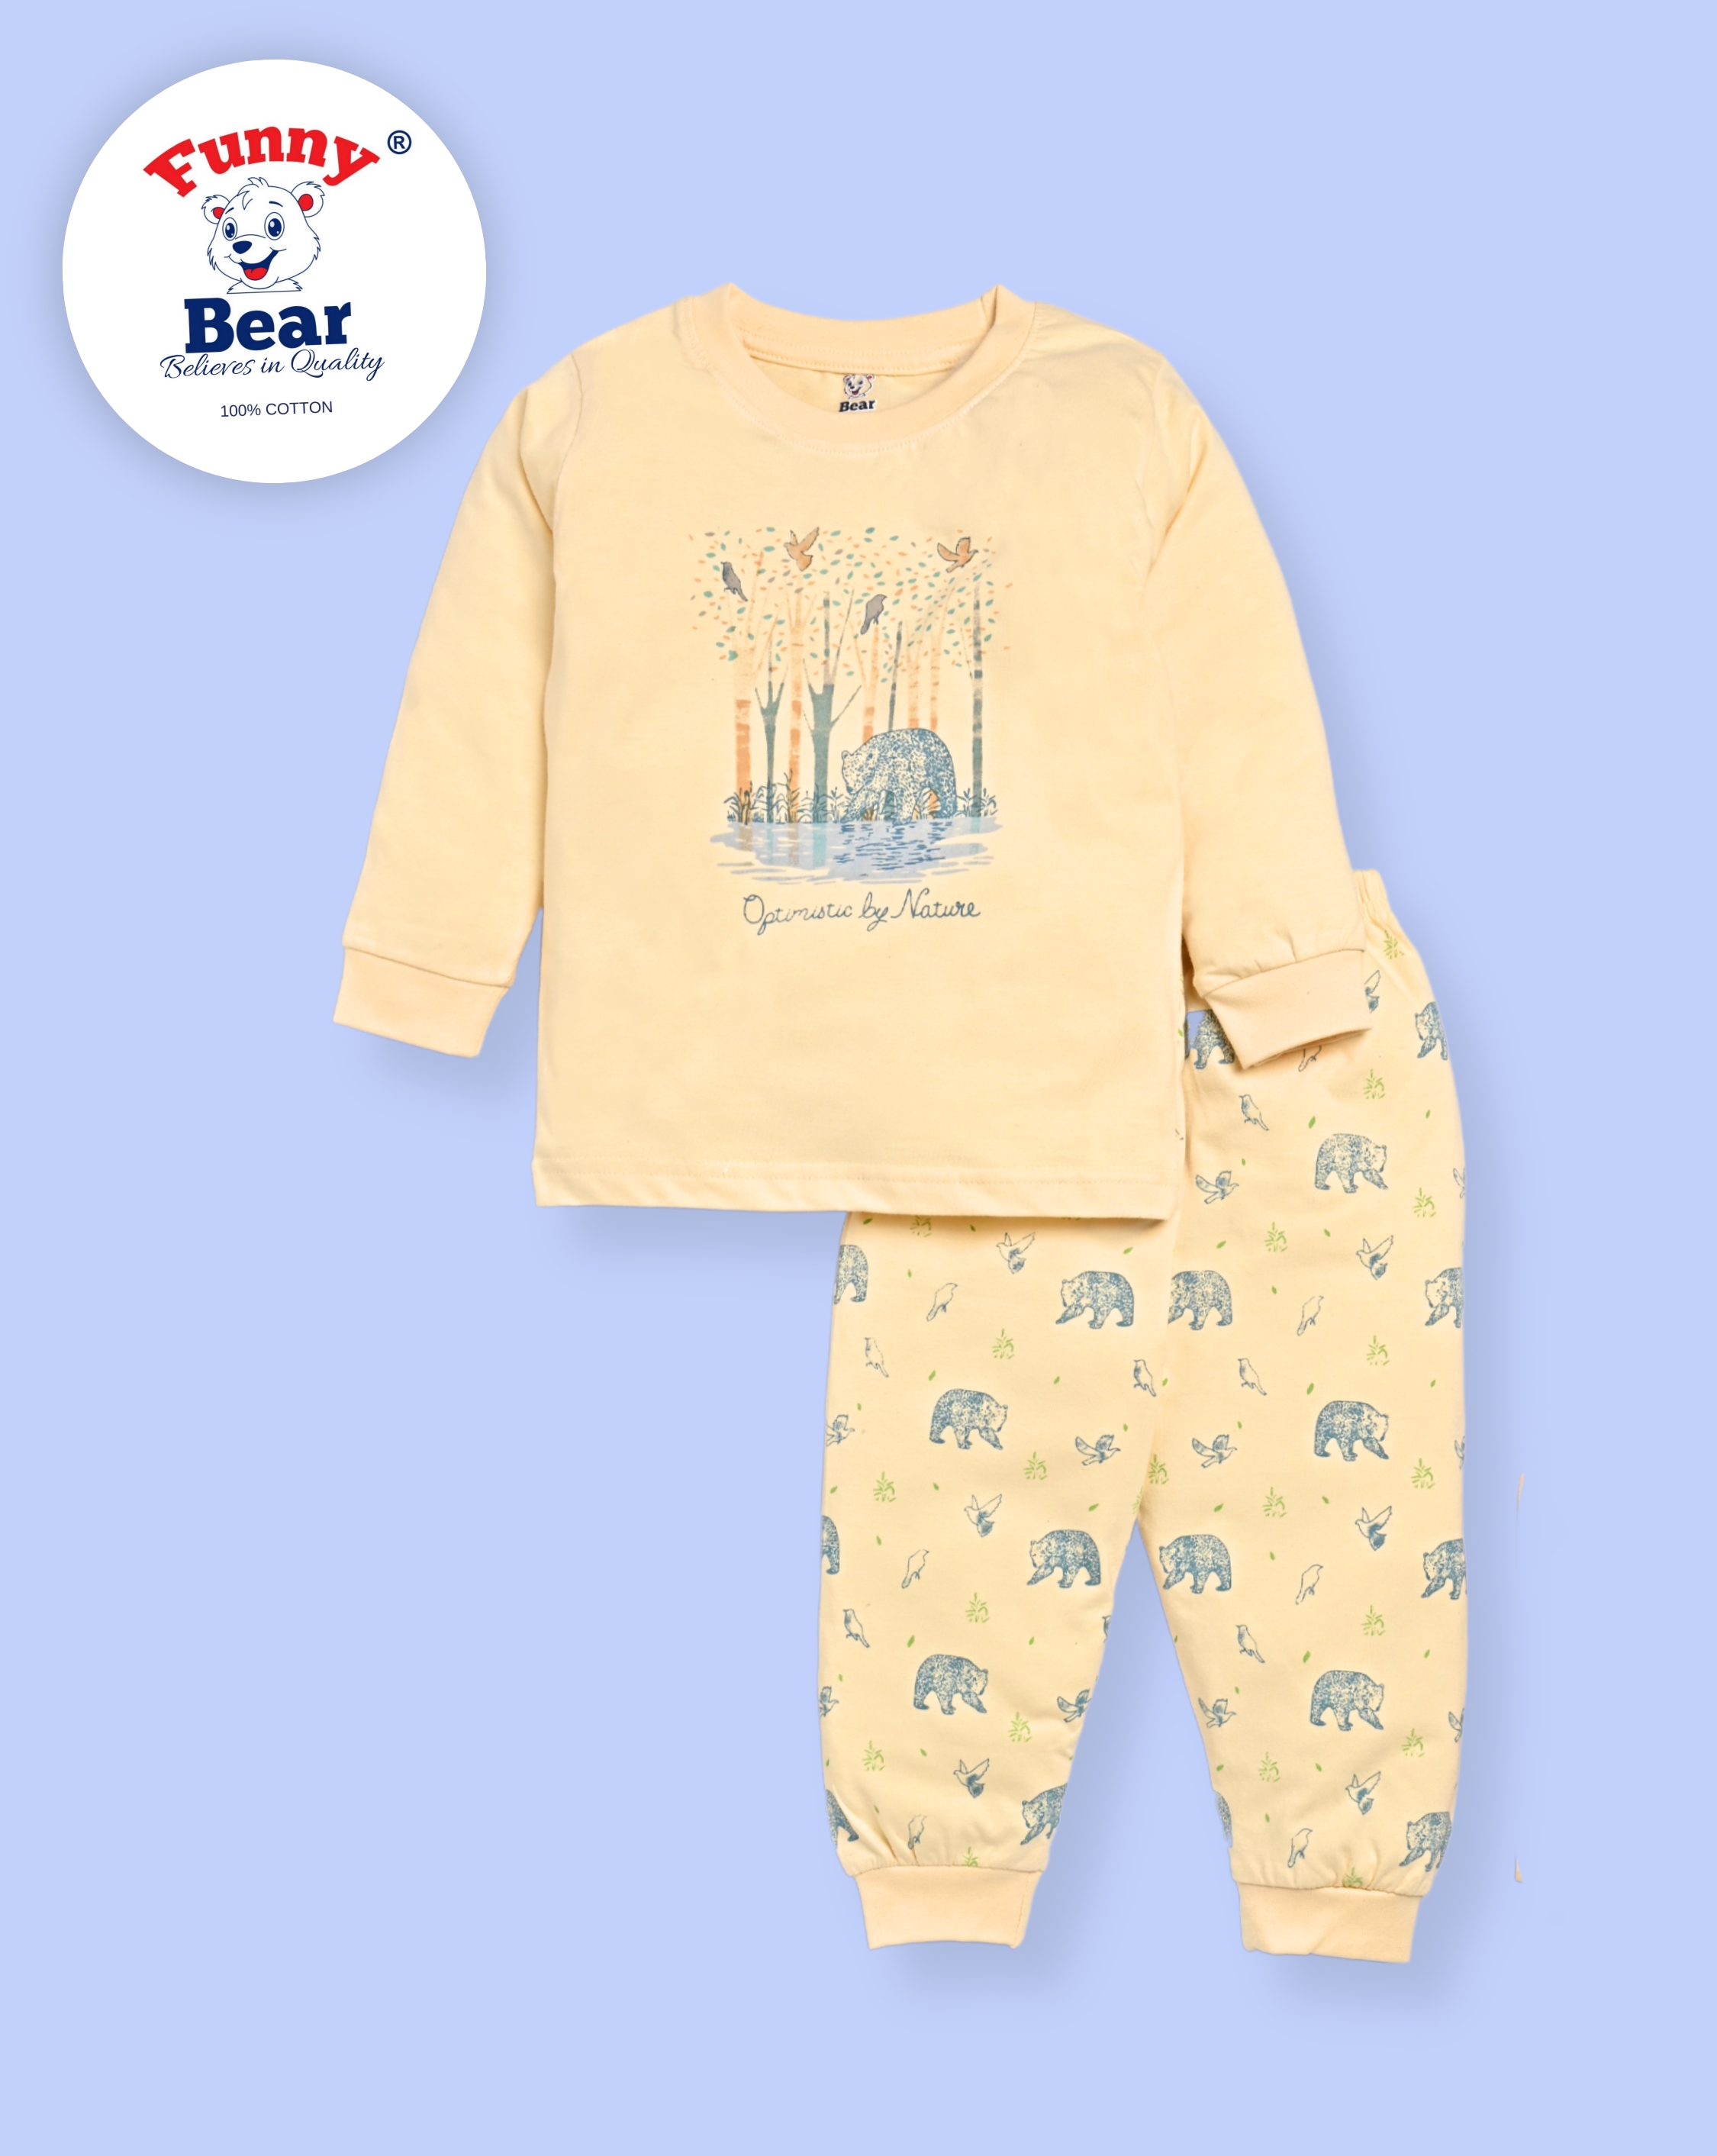 Funny Bear - Baby Clothes, Kids Clothes, Kids Wear Manufacturer in India image